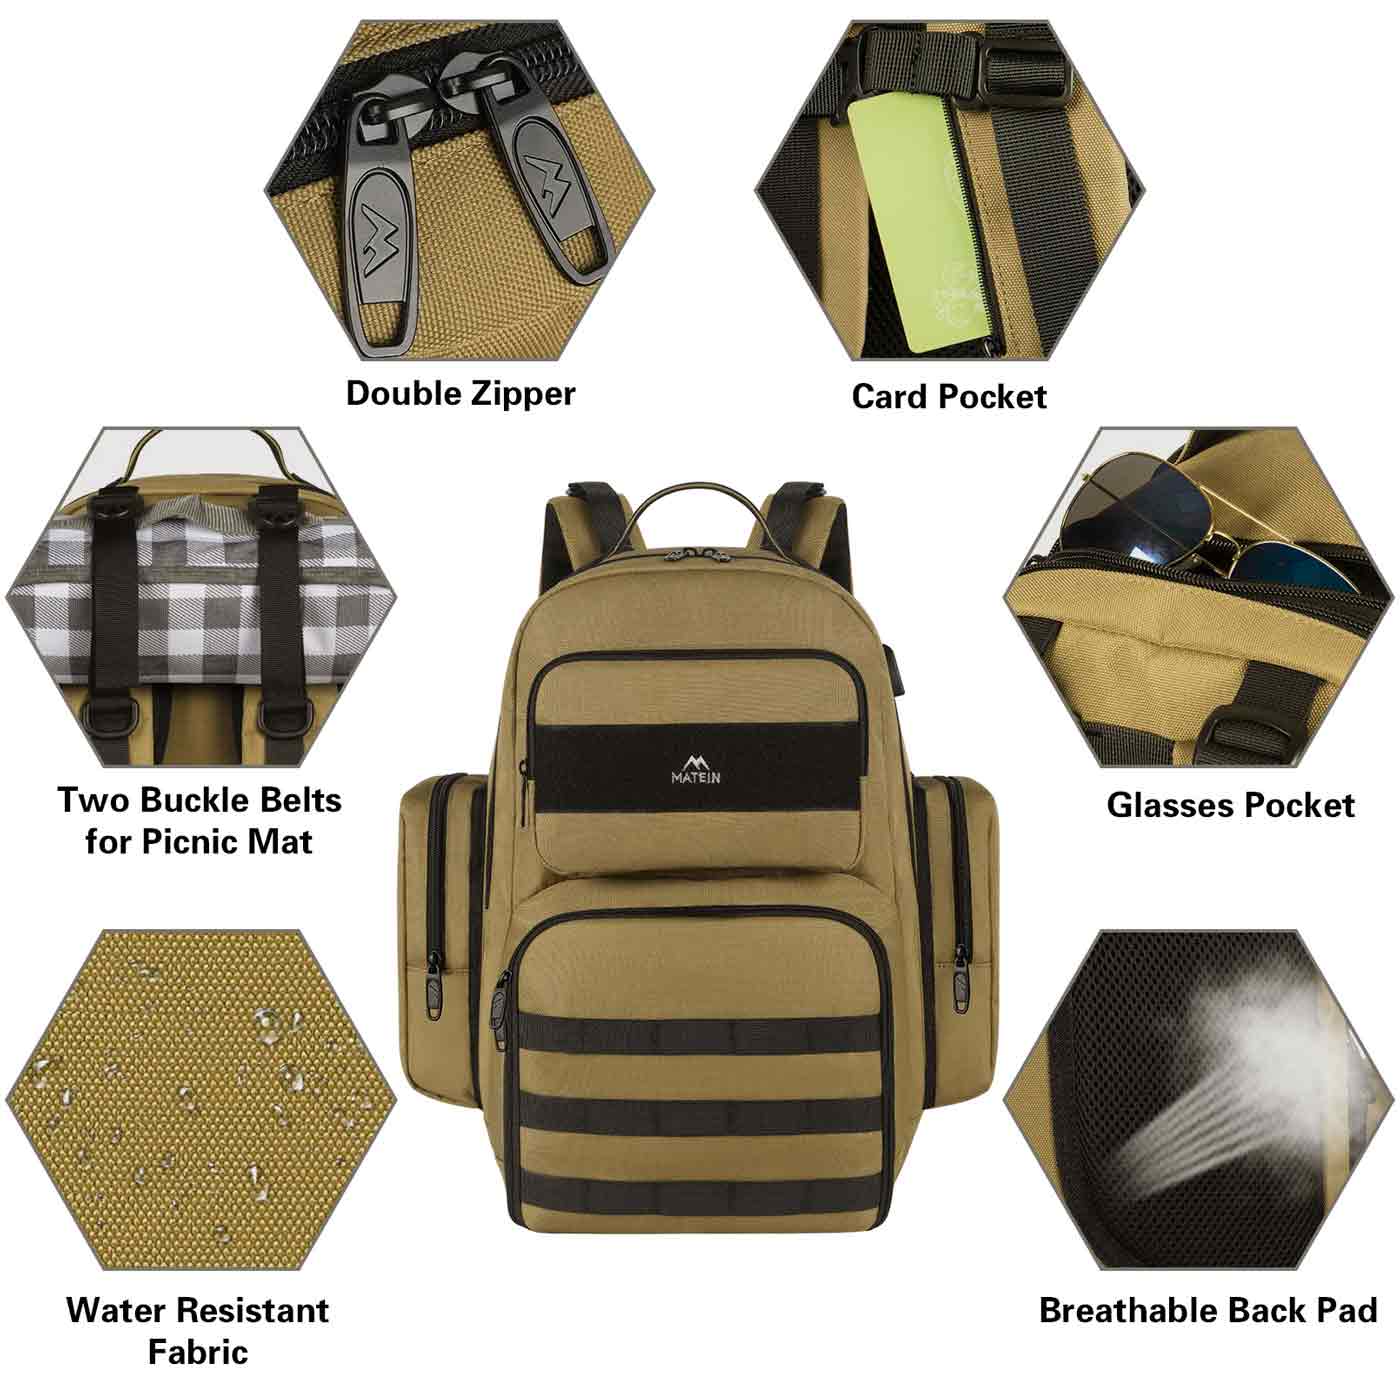 Matein Heavy Duty Backpack with Lunch Box